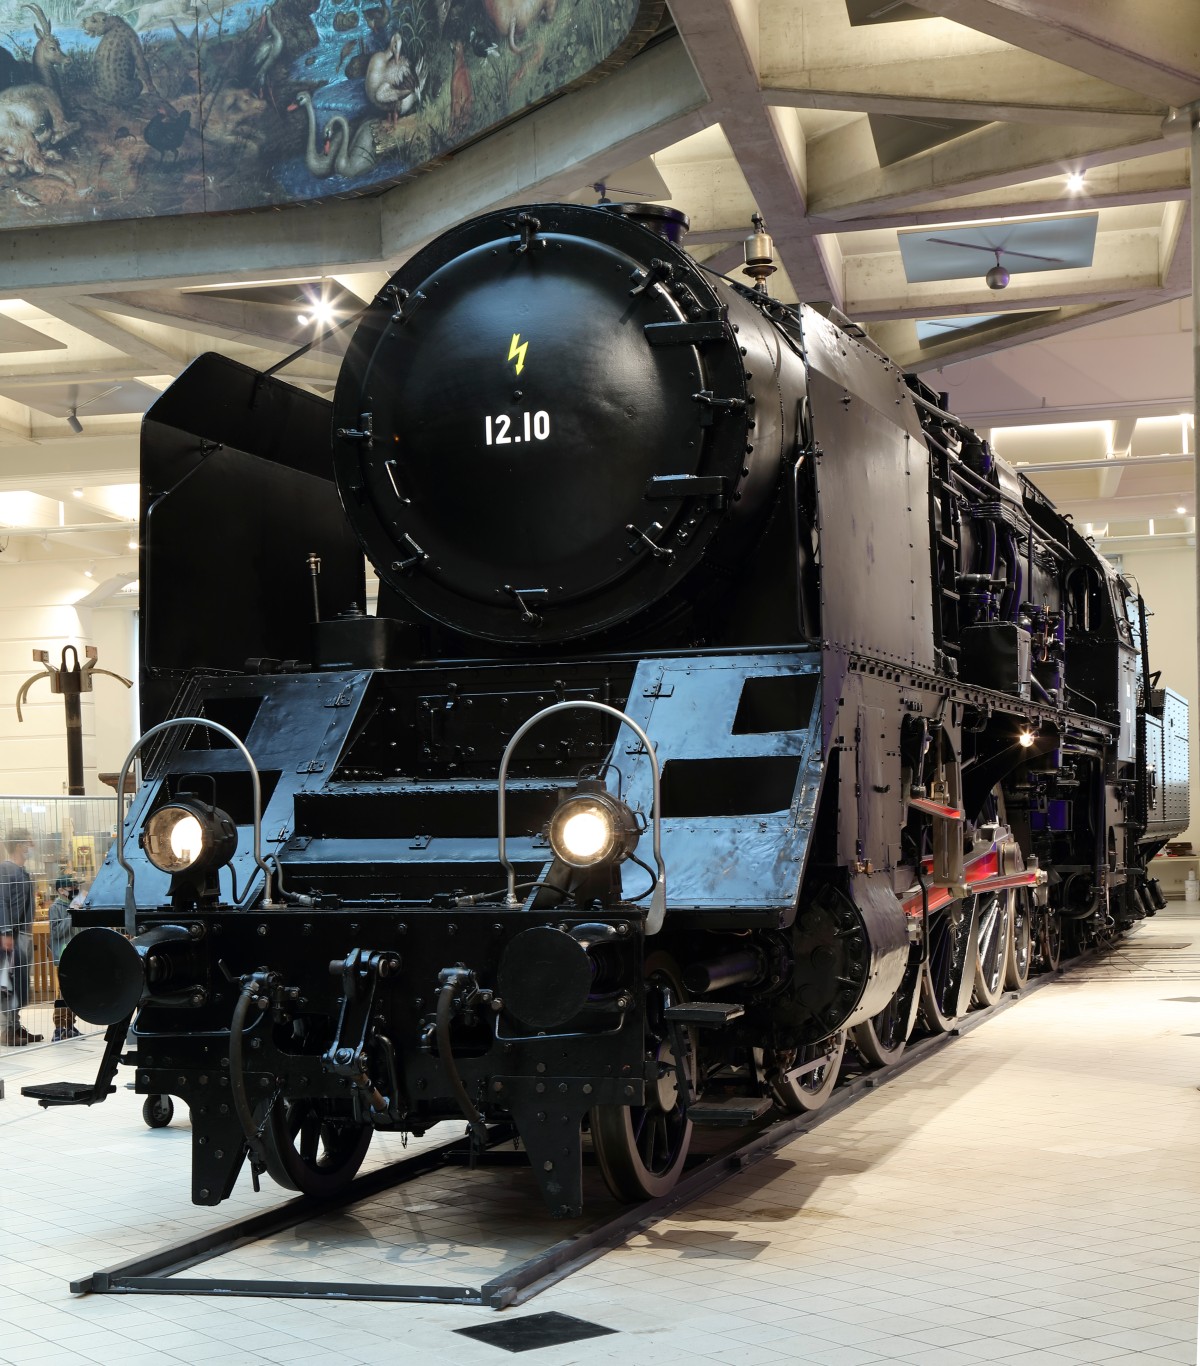 Front view of the elaborately restored 12.10 steam locomotive at the museum